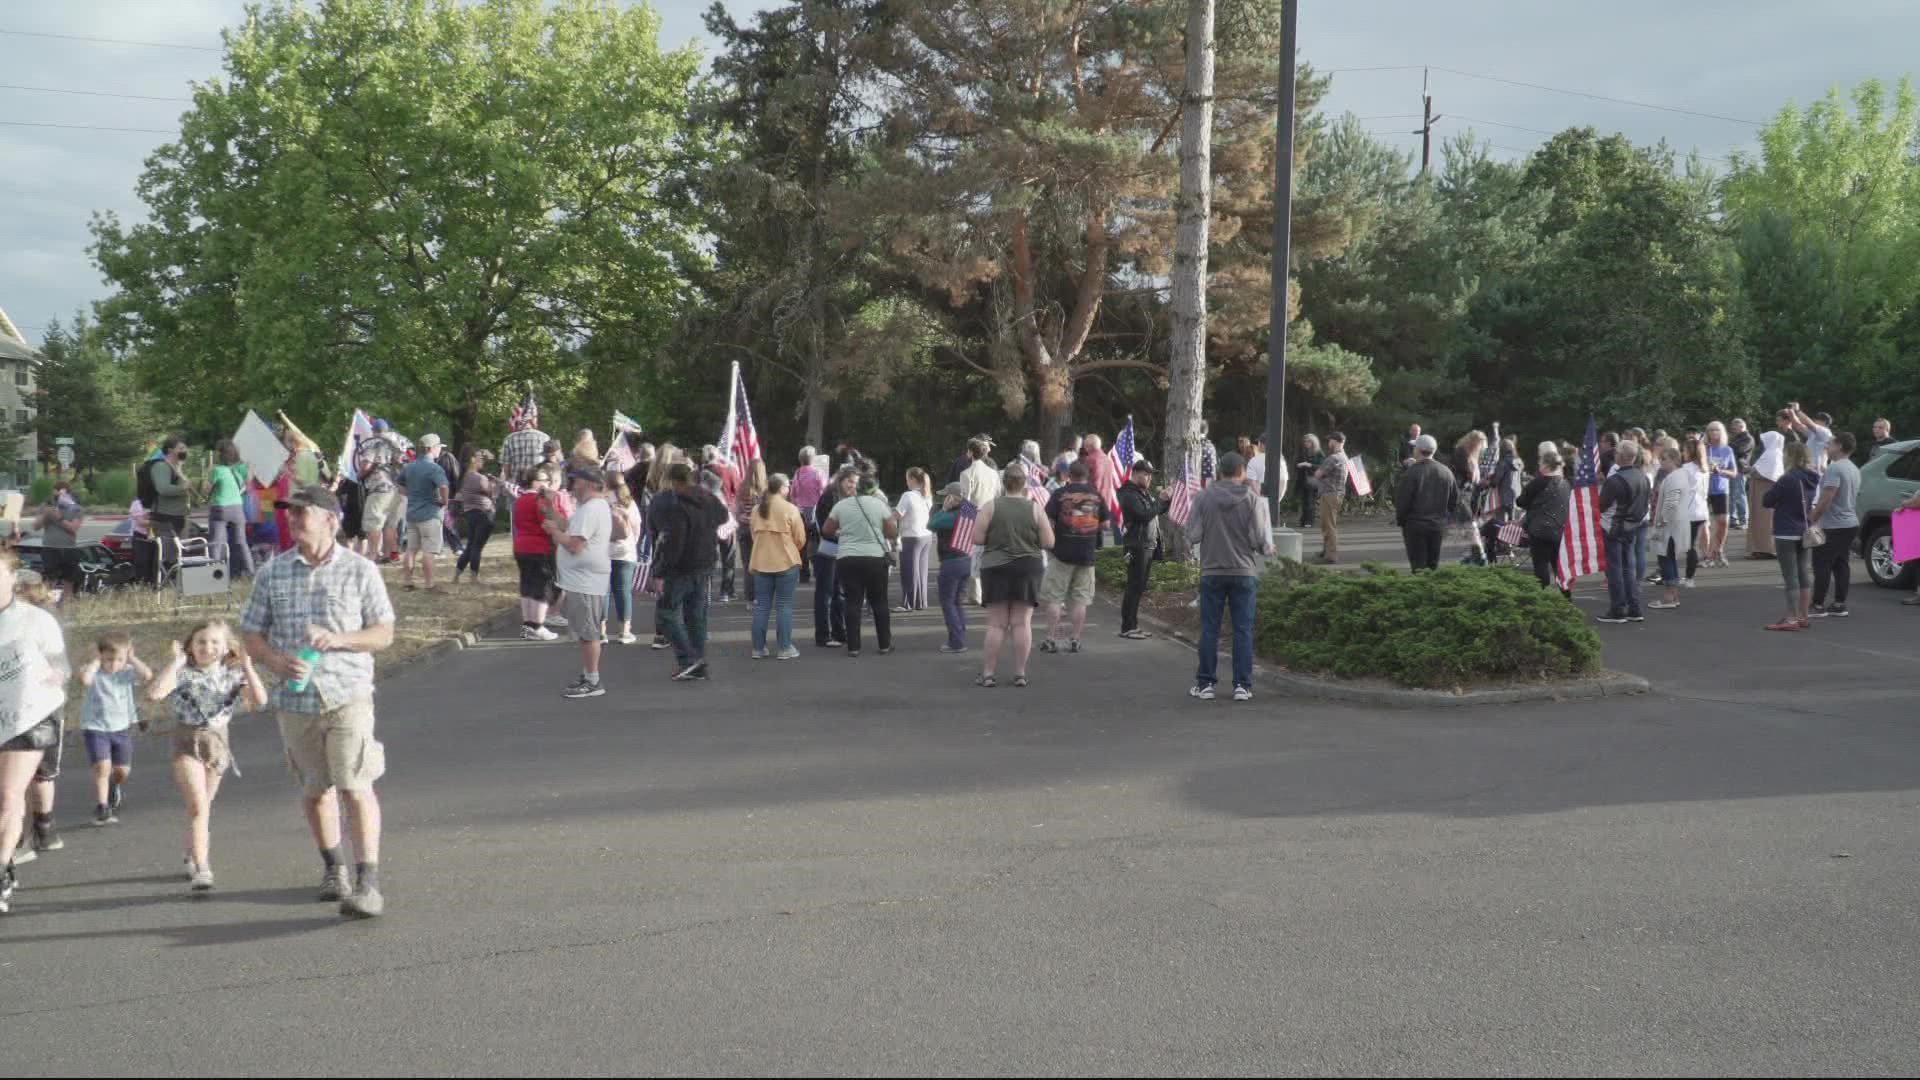 Protesters were out in Beaverton, protesting being unable to give live testimony, or live comments, during a virtual school board meeting.